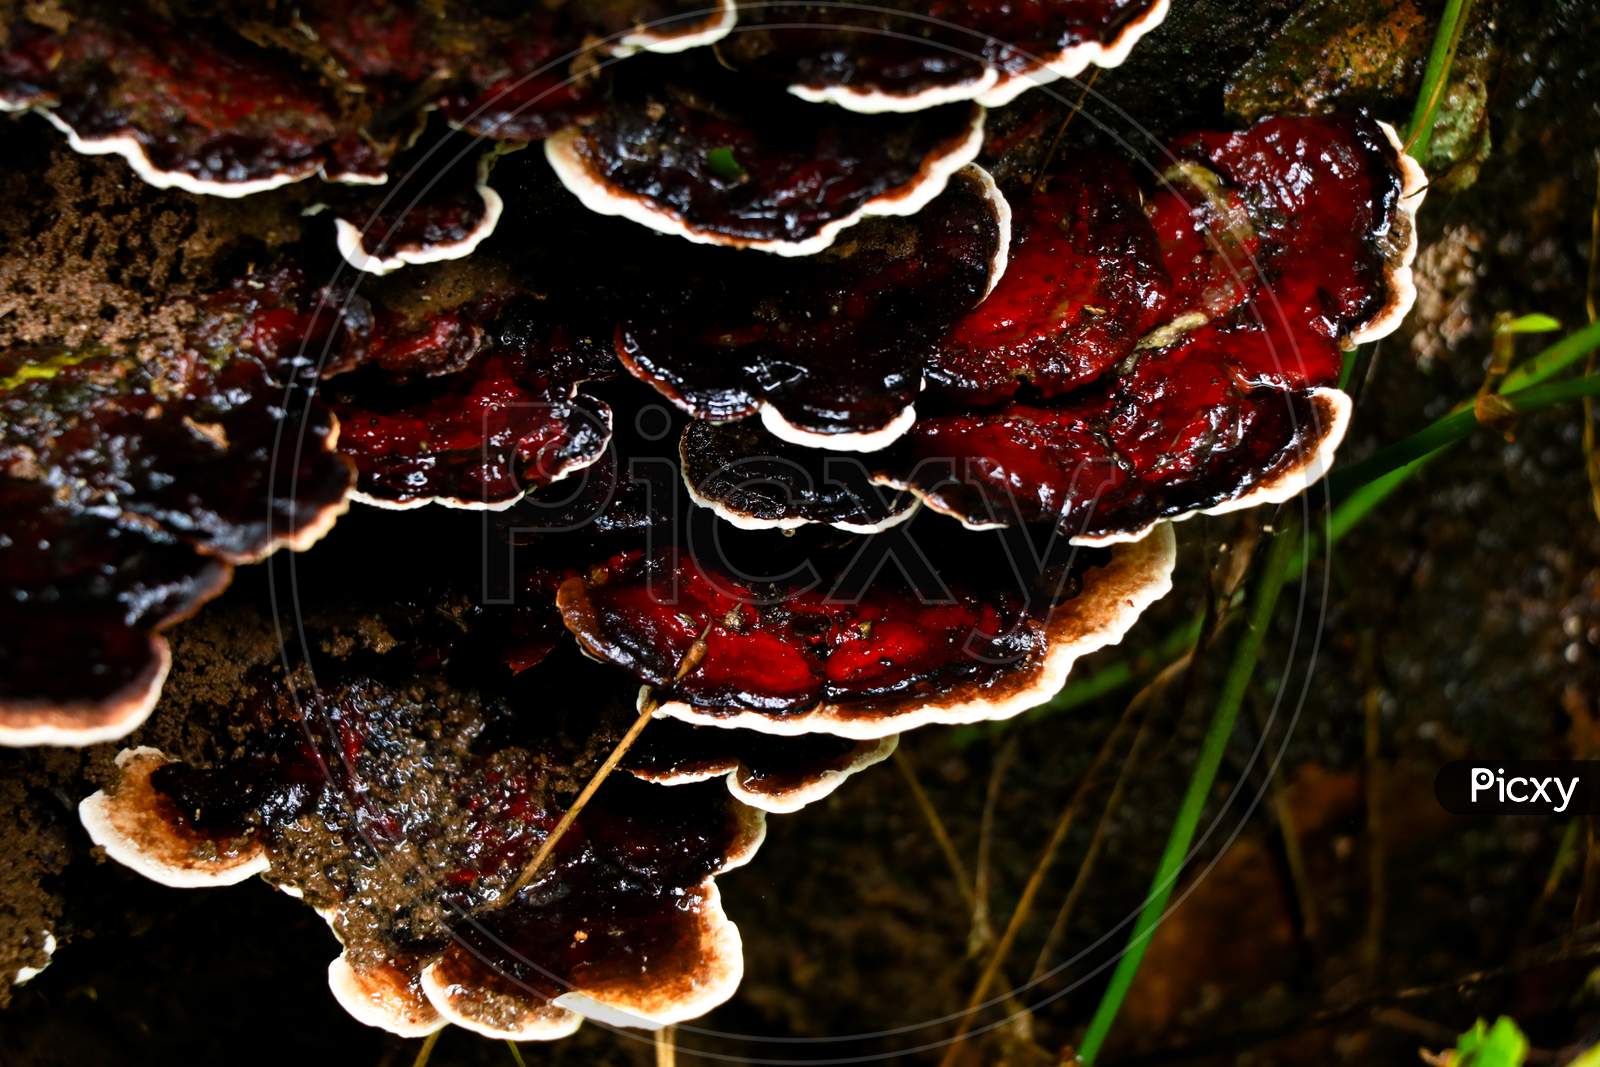 Brown Color Mushroom Or Conk On A Decaying Wood Trunk From Western Ghats, Selective Focus